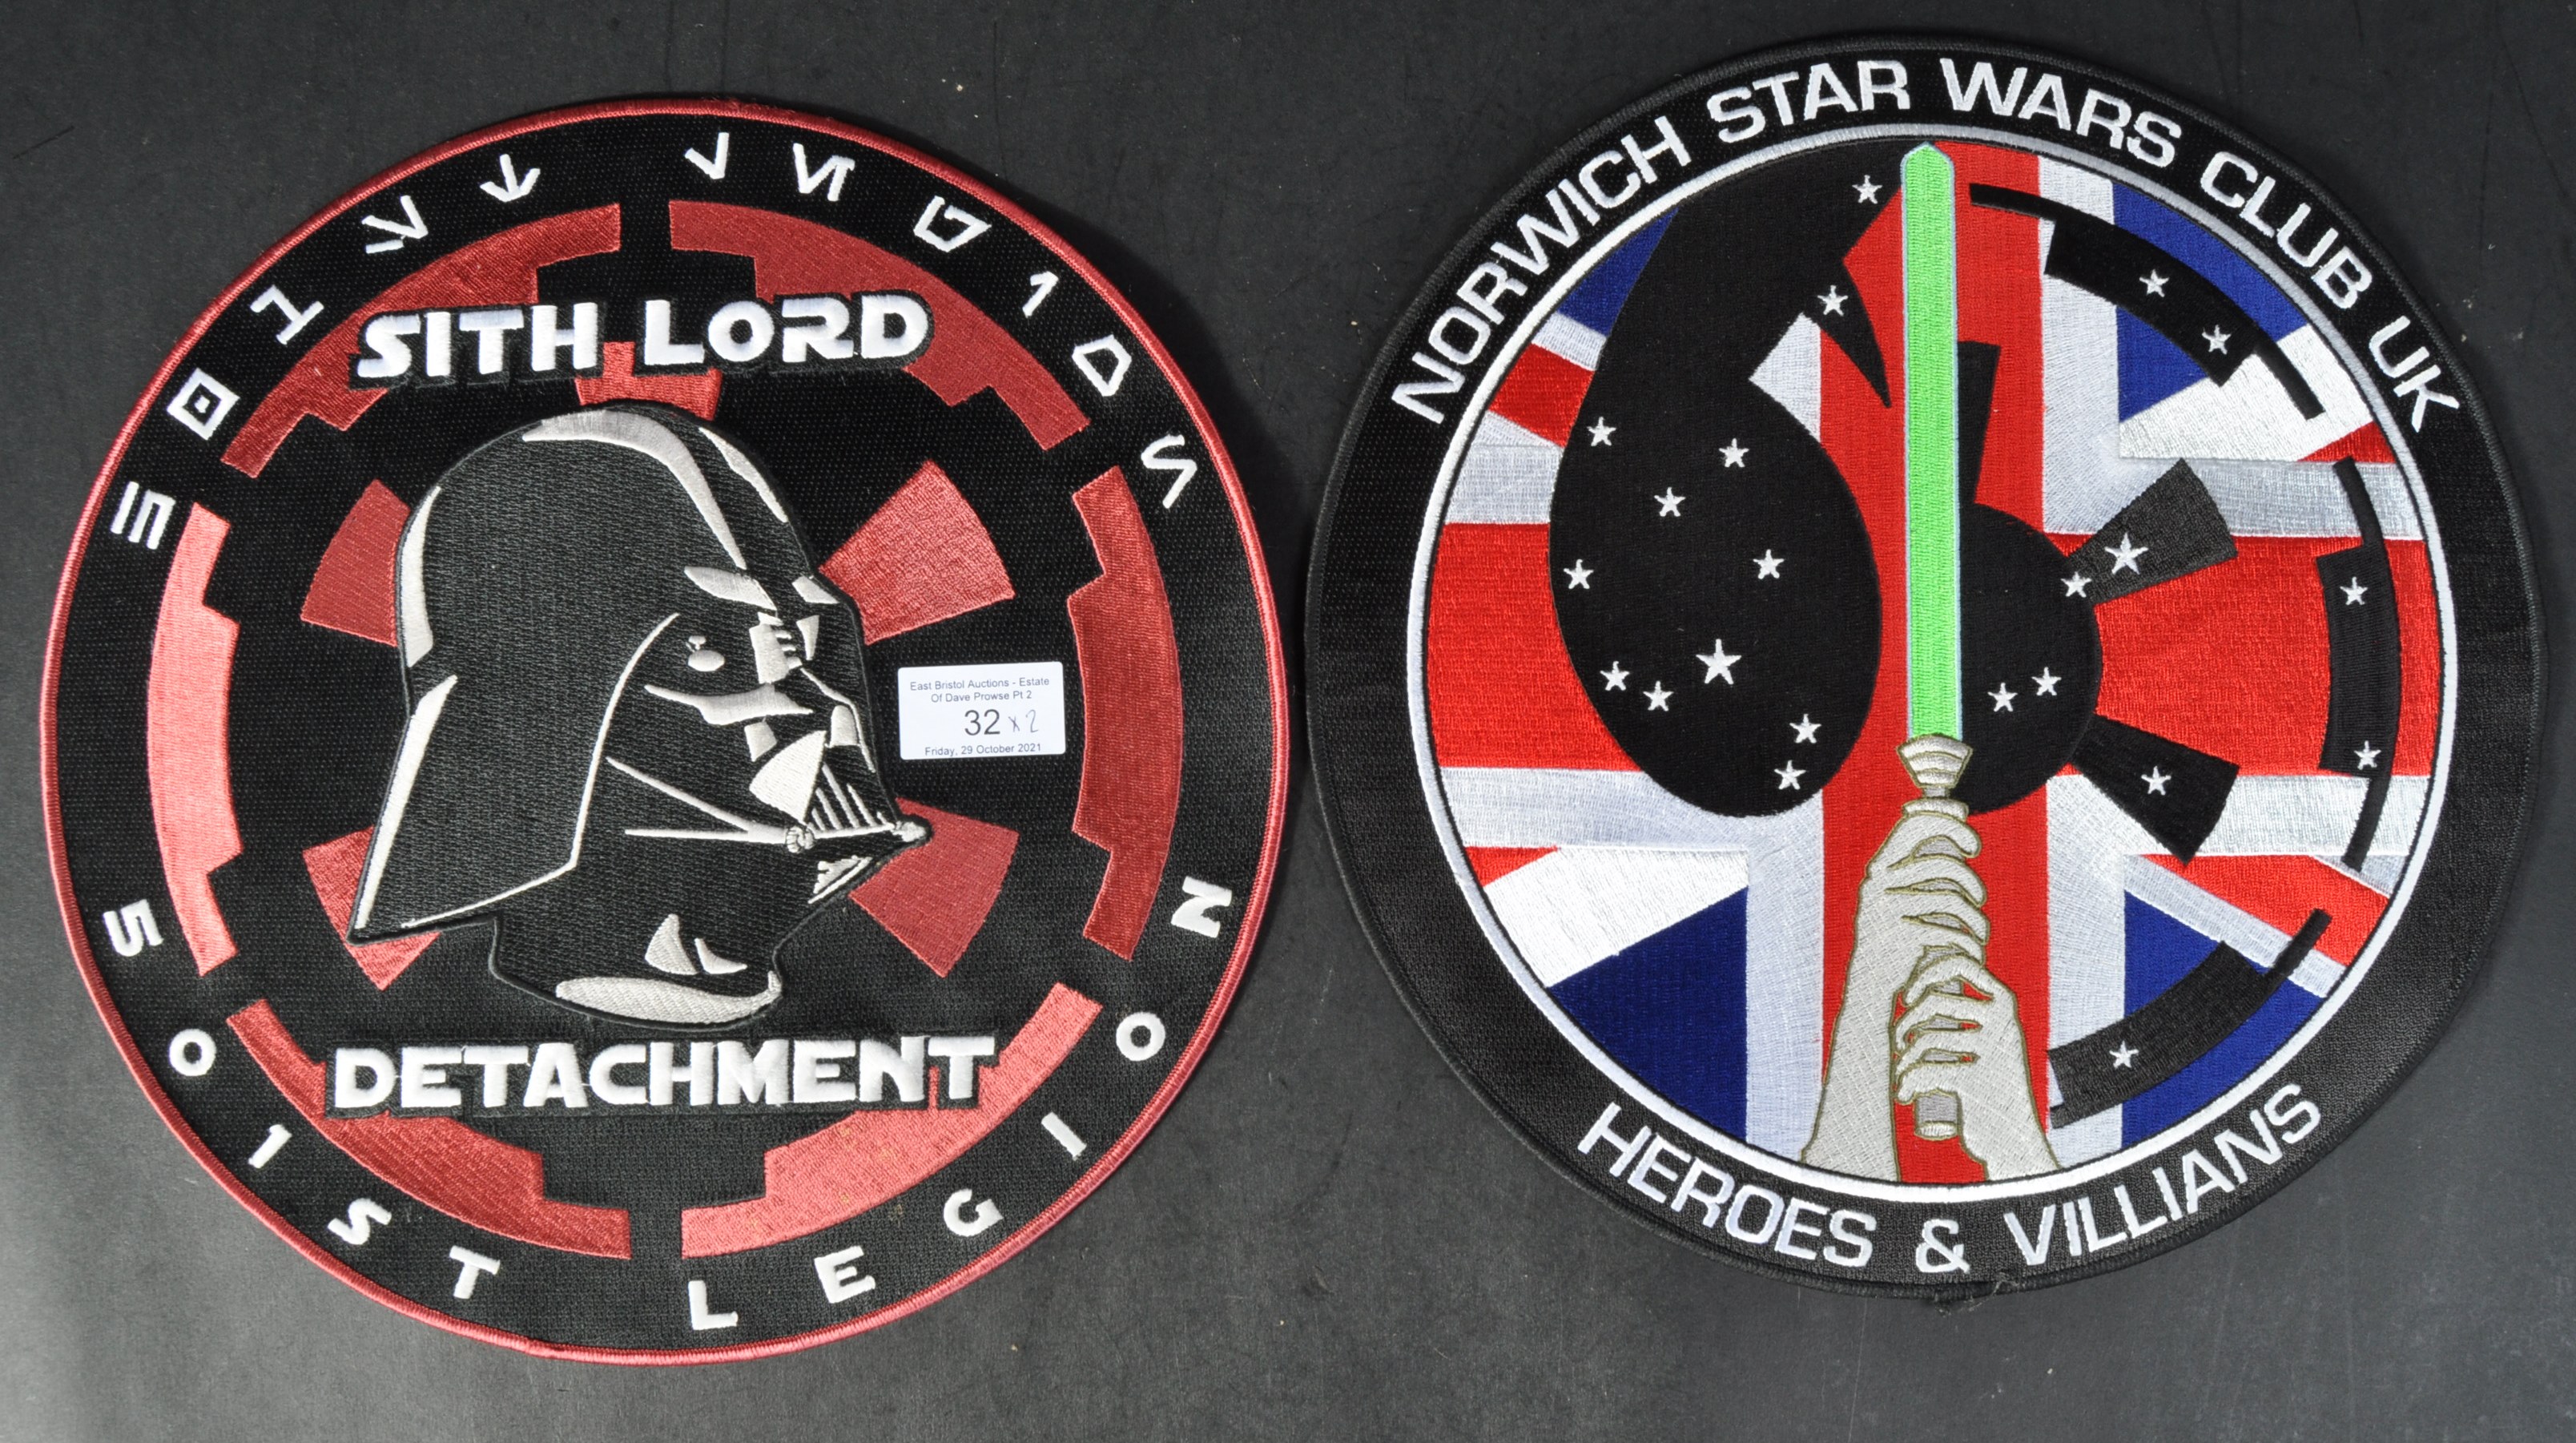 ESTATE OF DAVE PROWSE - LARGE COSTUME GROUP EMBROIDERED PATCHES - Image 2 of 6